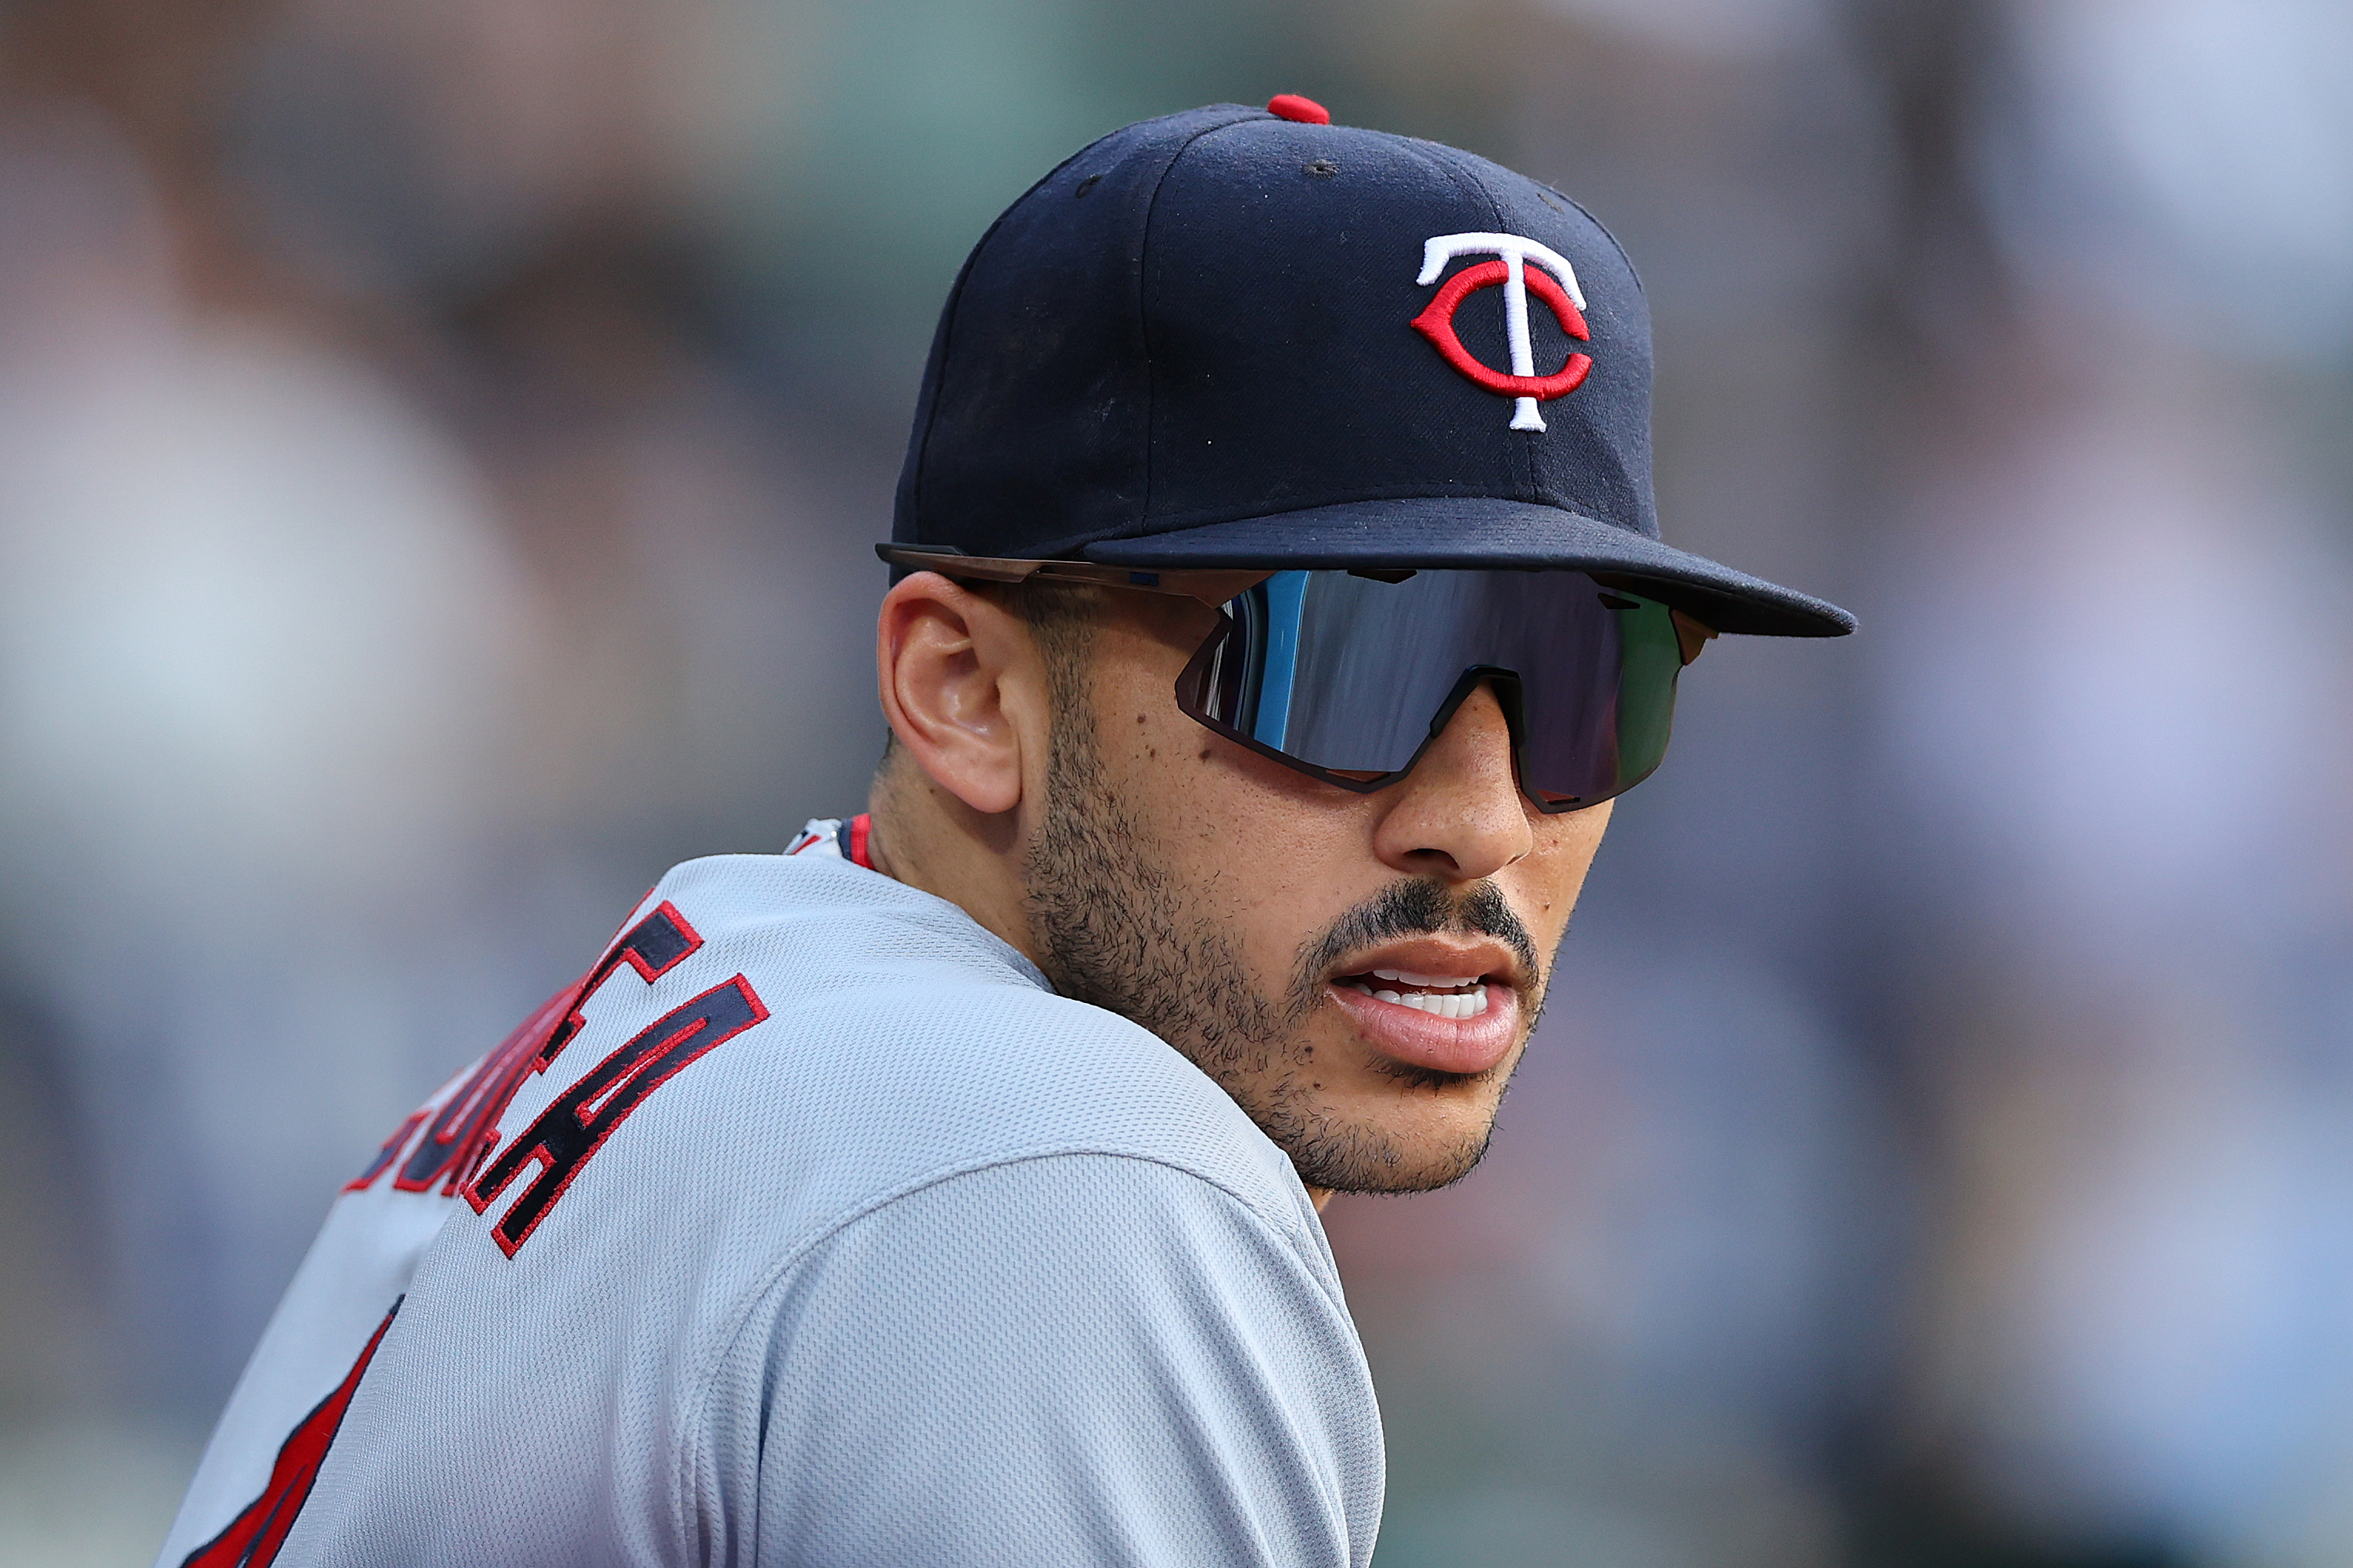 Carlos Correa #4 of the Minnesota Twins looks on against the Chicago White Sox at Guaranteed Rate Field on October 05, 2022 in Chicago, Illinois.